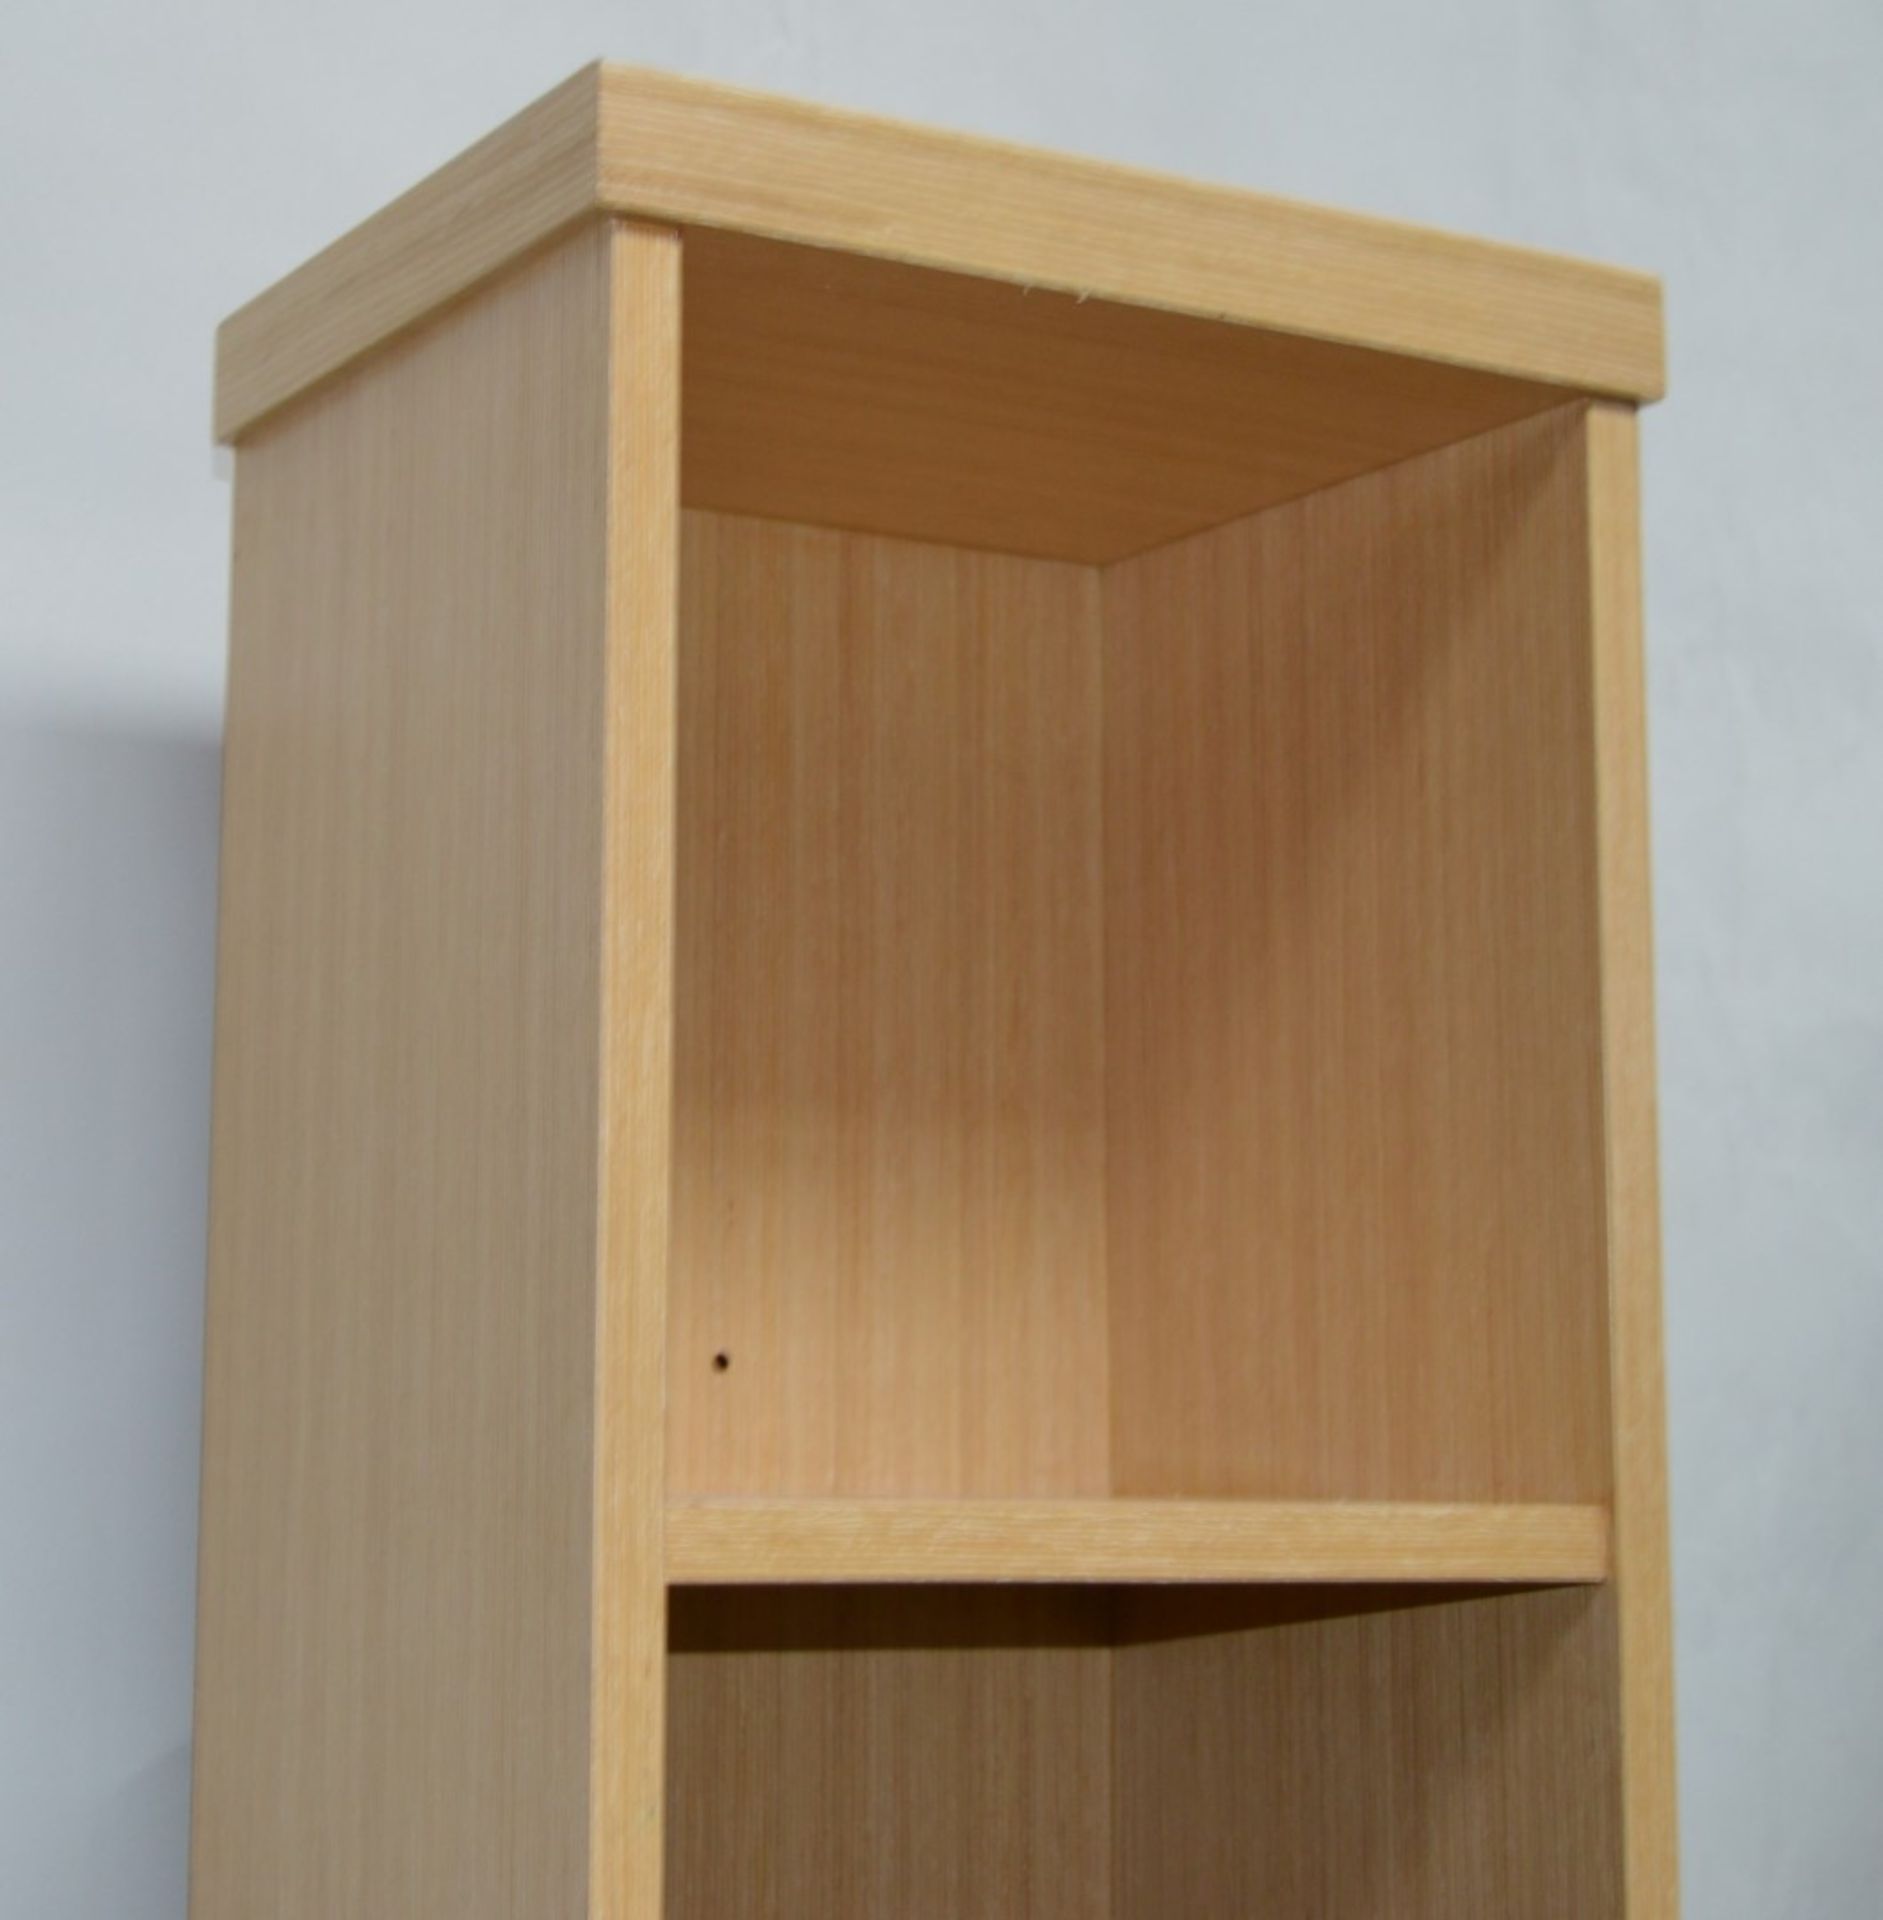 1 x Vogue ARC Series 2 Bathroom Storage Shelving Unit - Wall Mounted or Floor Standing - OAK - Image 8 of 8